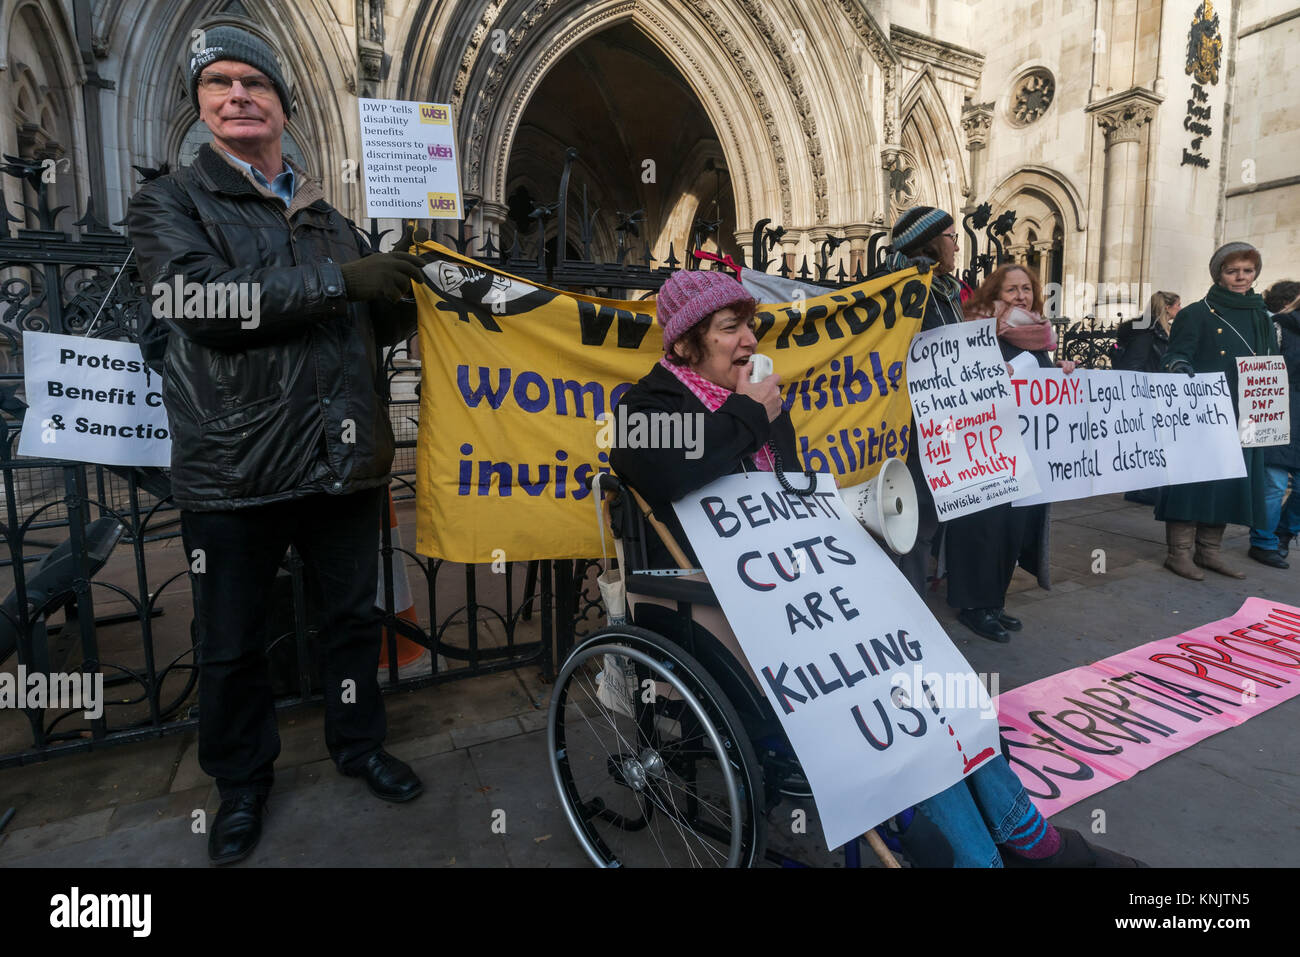 December 12, 2017 - London, UK. 12th December 2017. A lunchtime vigil by Mental Health Resistance Network, Winvisible (women with visible & invisible disabilities) and DPAC (Disabled People Against Cuts) supported the case of RF, who contends that the way people experiencing psychological distress are treated by new Personal Independence Payment (PIP) rules is unfair and discriminatory, being held at the High Court. Changes to the rules made in March 2017 by the Dept of Work & Pensions mean that those with serious mental health conditions who are unable to plan or undertake a journey because o Stock Photo